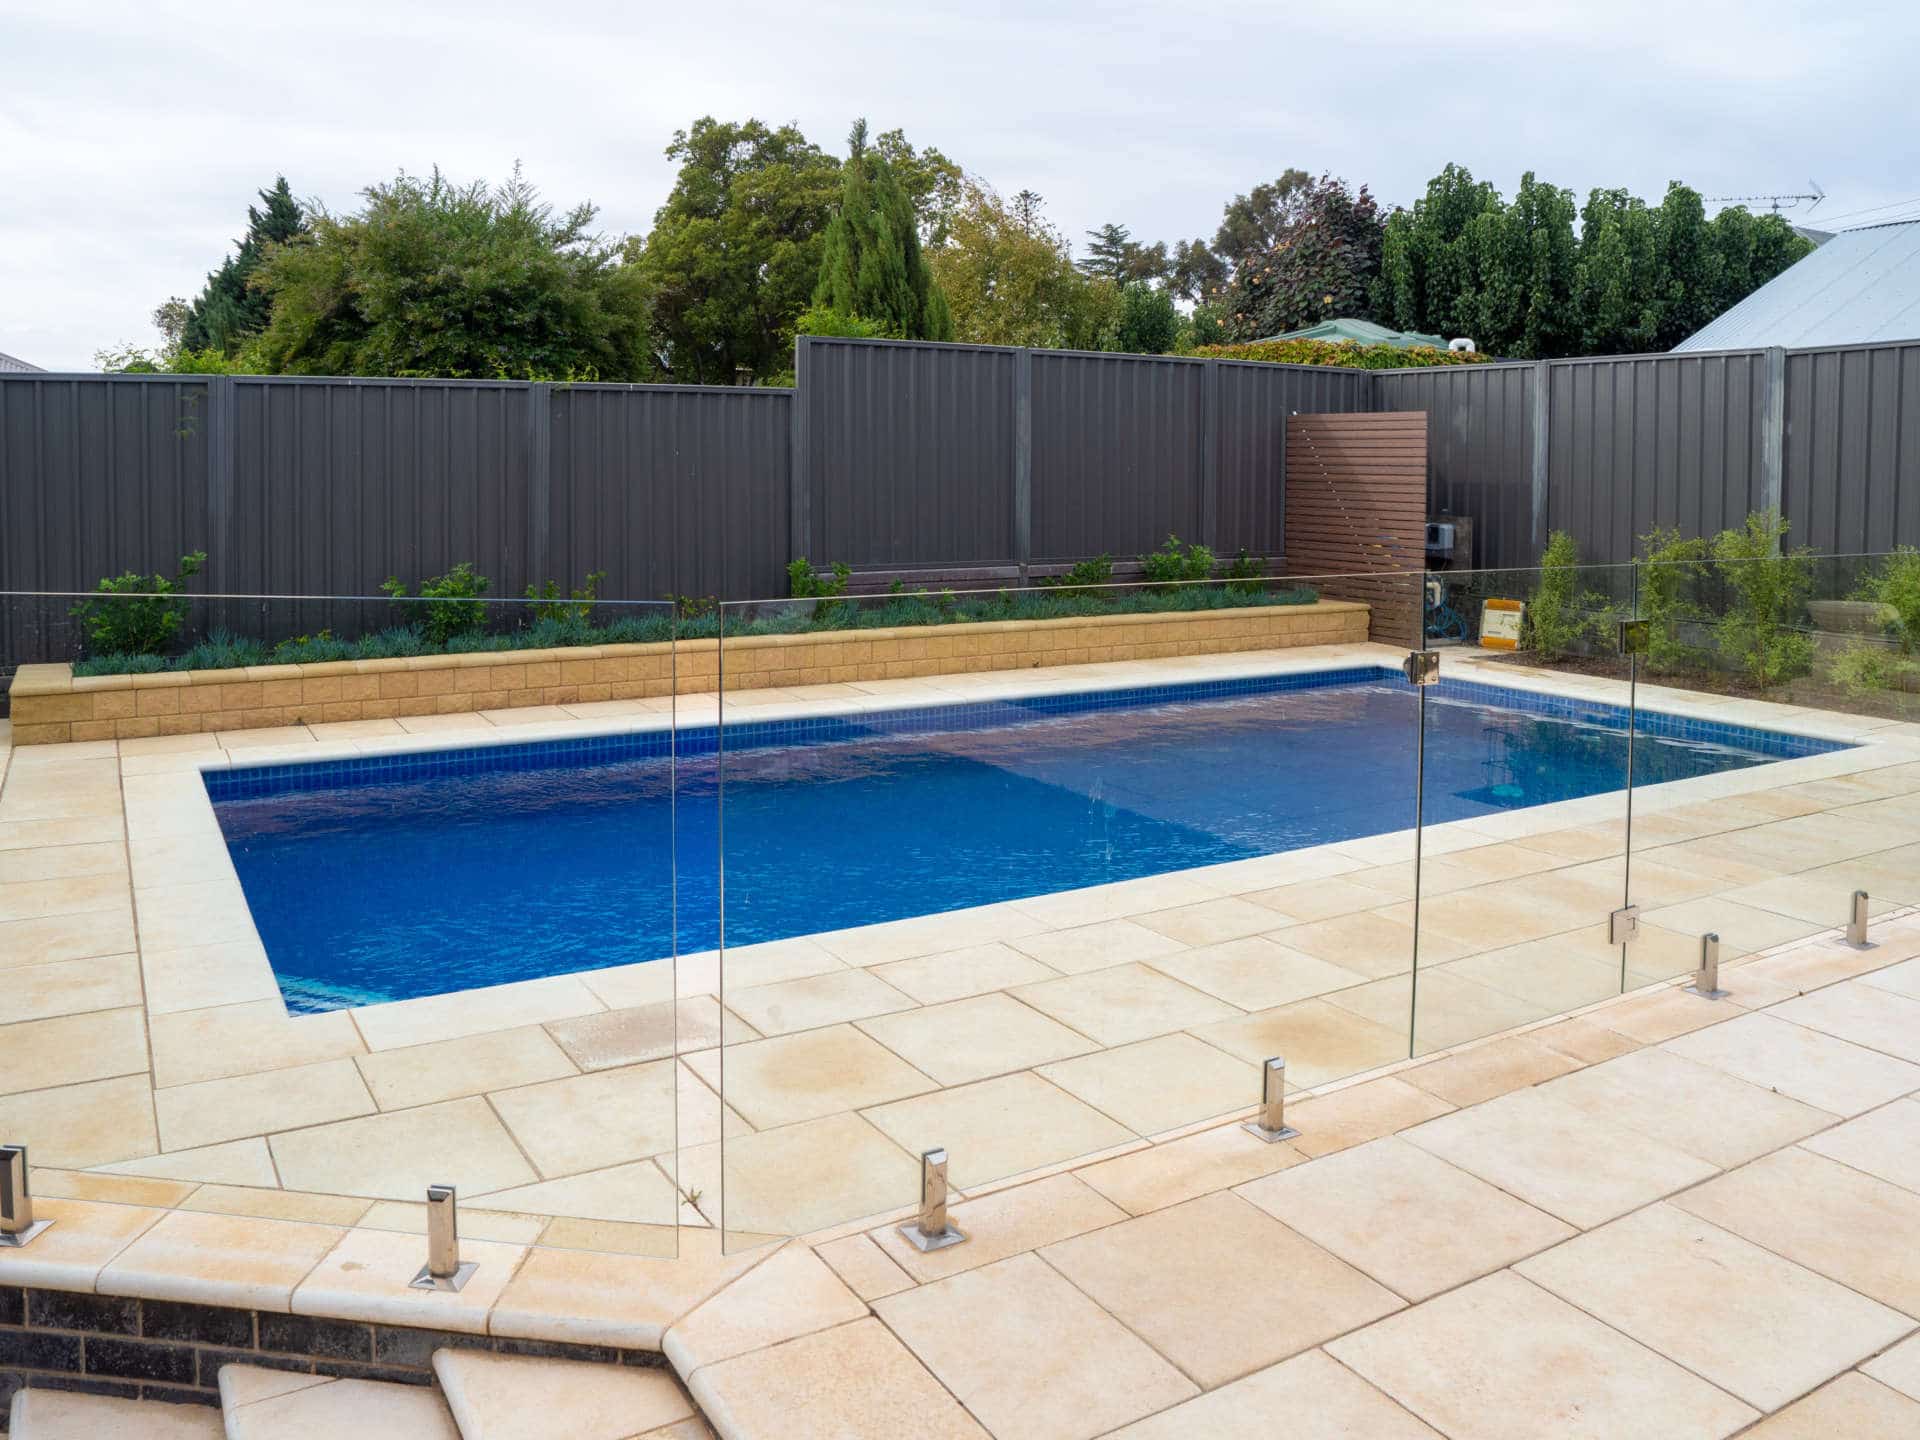 Australian Outdoor Living makes splash at South Australian awards ceremony - Australian Outdoor Living won gold in the Concrete Pool up to $50,000 category with this stunning install, Australian Outdoor Living. 